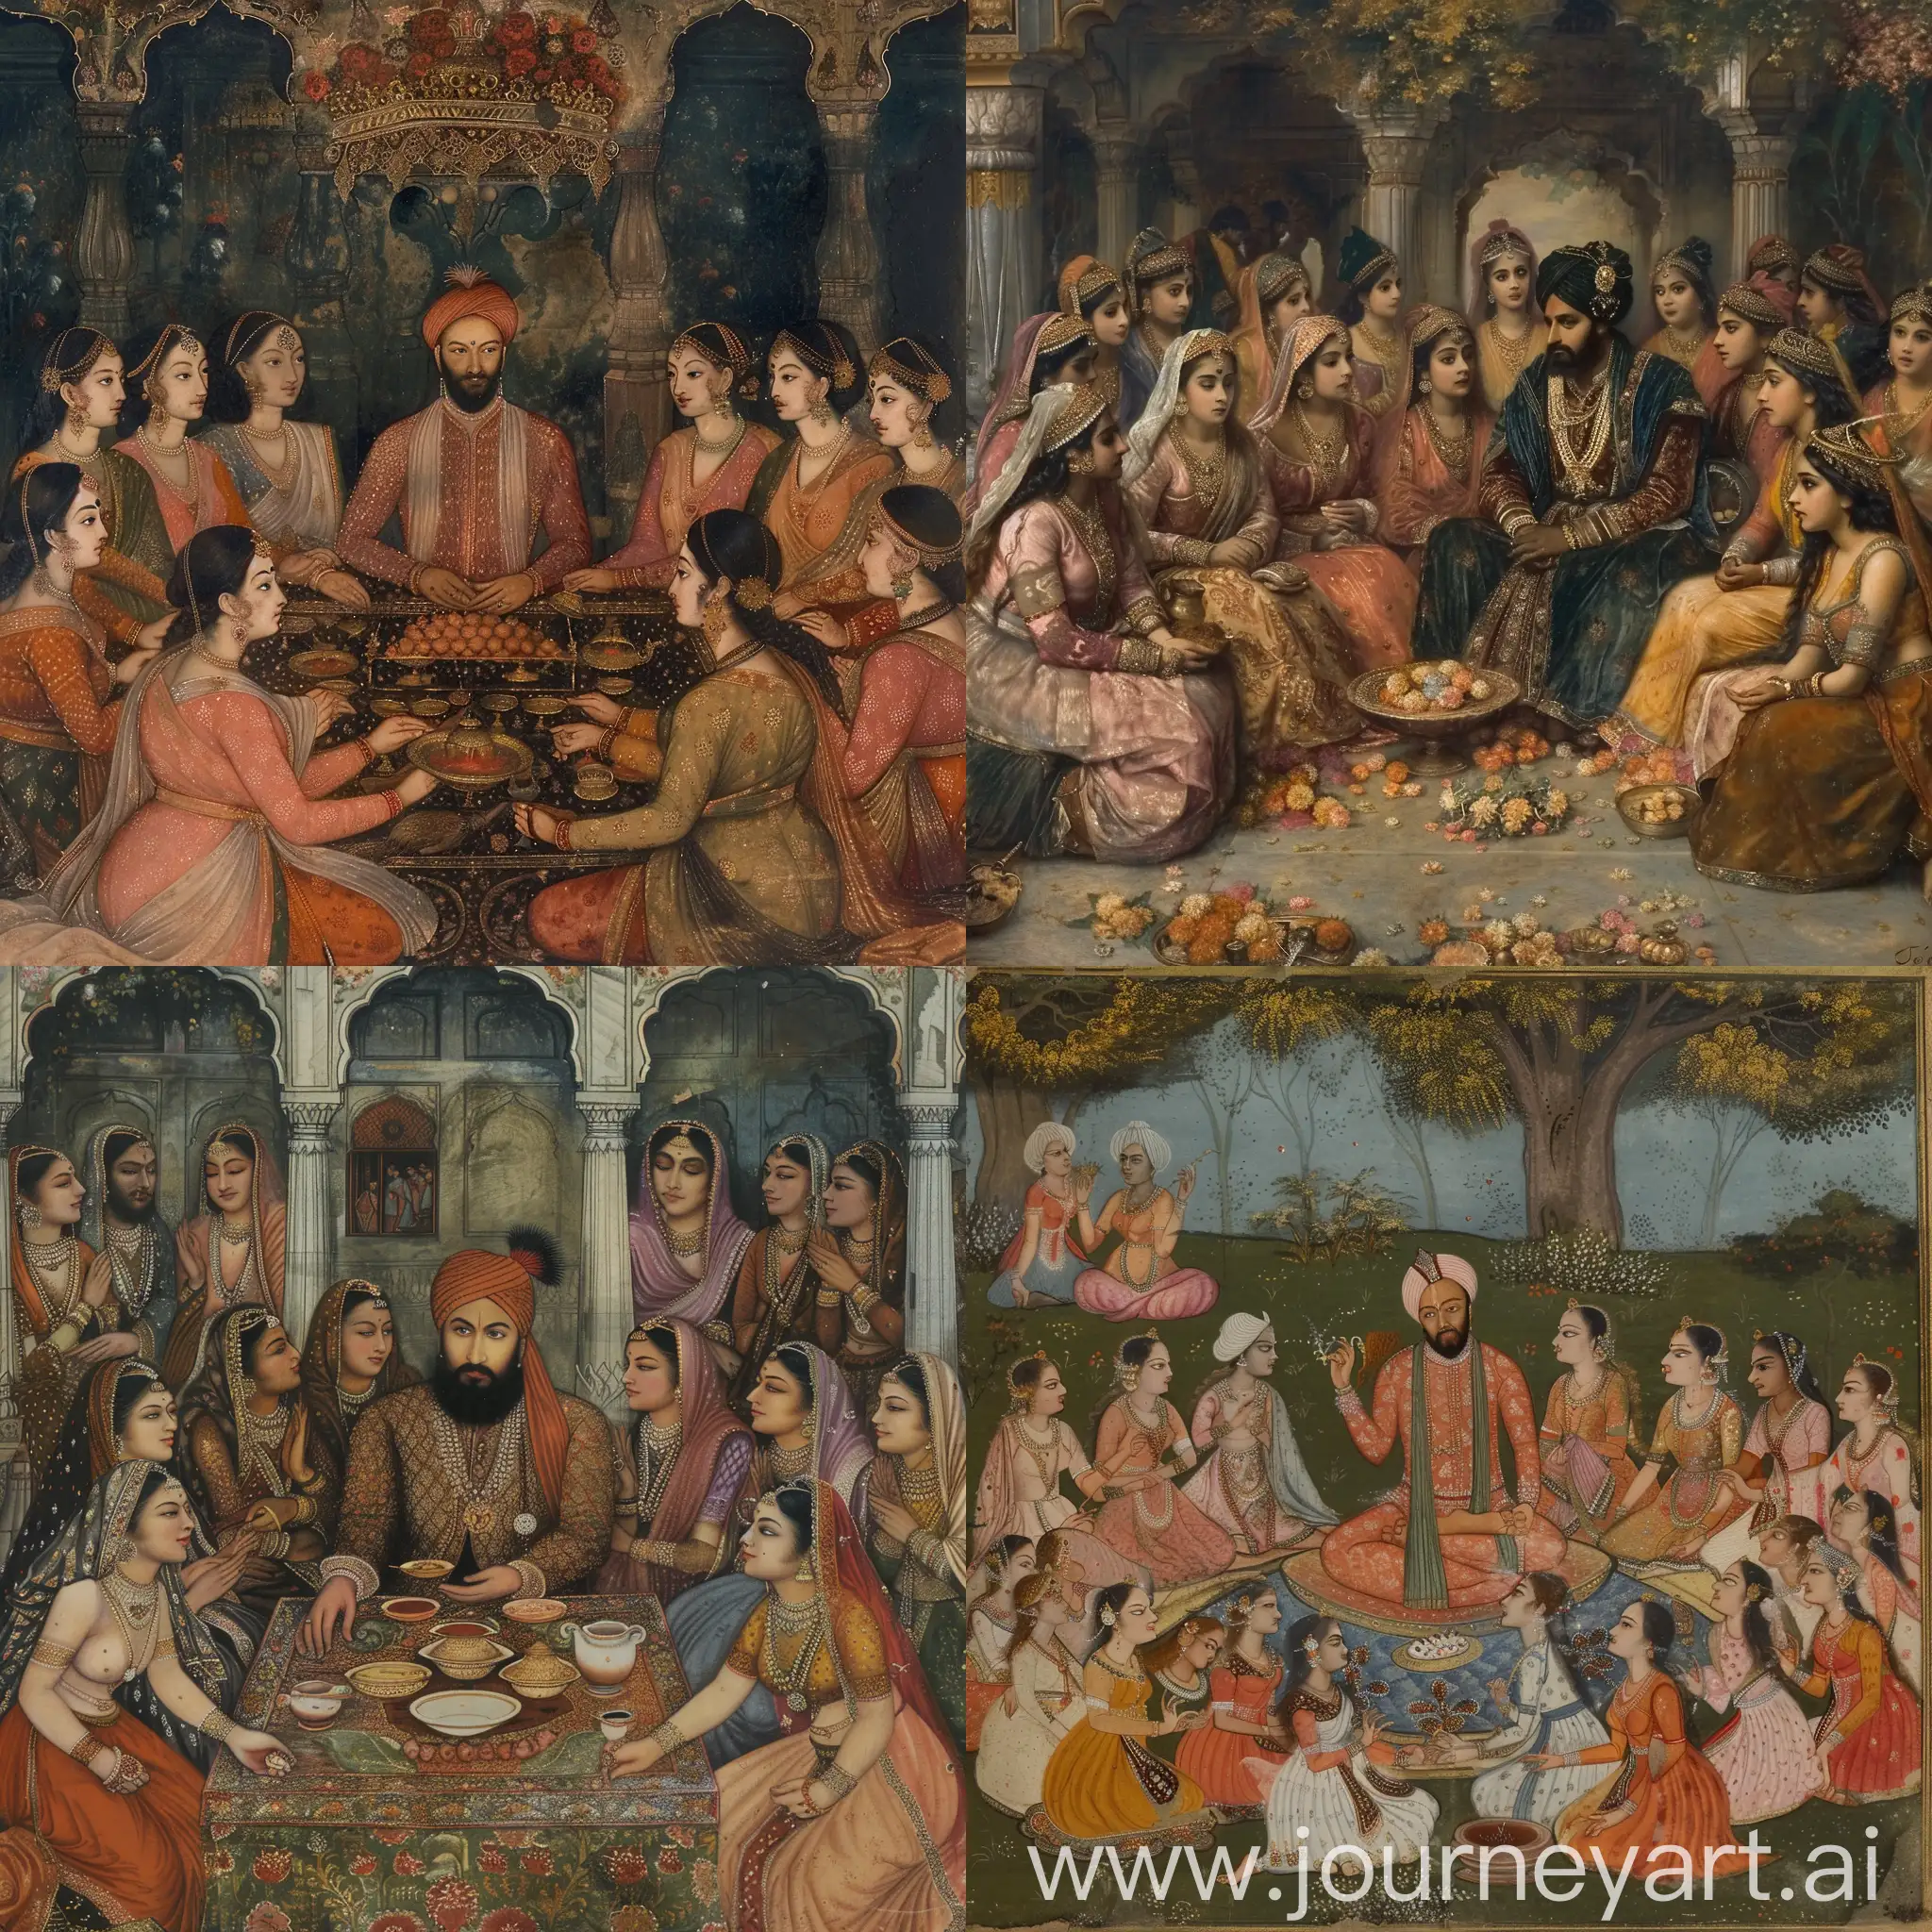 Emperor-Jahangir-with-His-Concubines-in-a-Luxurious-Setting